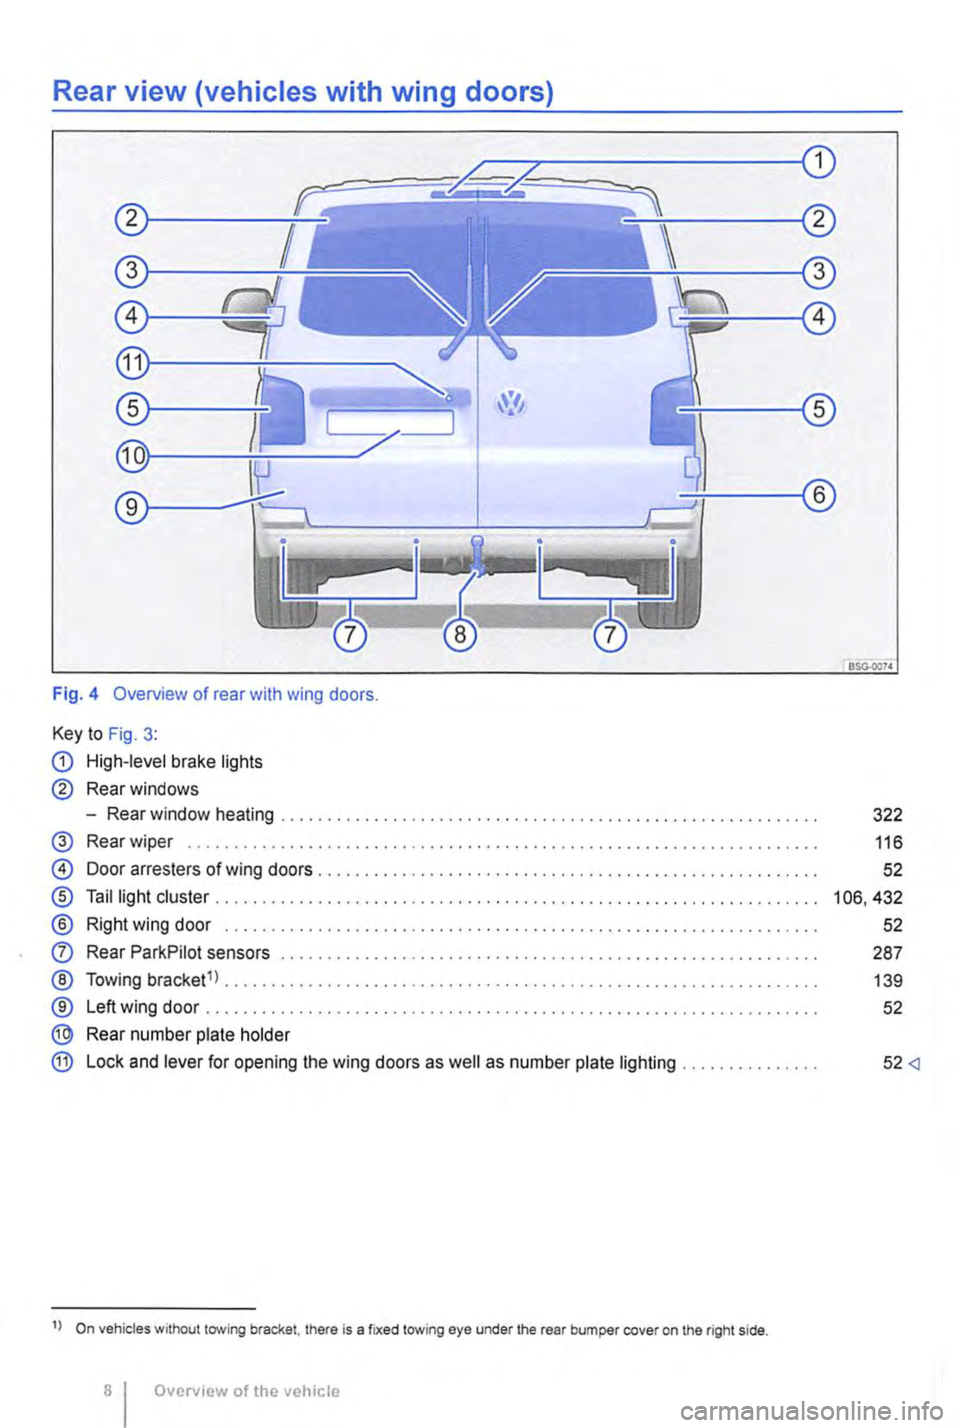 VOLKSWAGEN TRANSPORTER 2020  Owners Manual Rear view (vehicles with wing doors) 
Fig. 4 Overview of rear with wing doors. 
Key to Fig. 3: 
G) High-level brake lights 
® Rear windows 
-Rear window heating ......................................